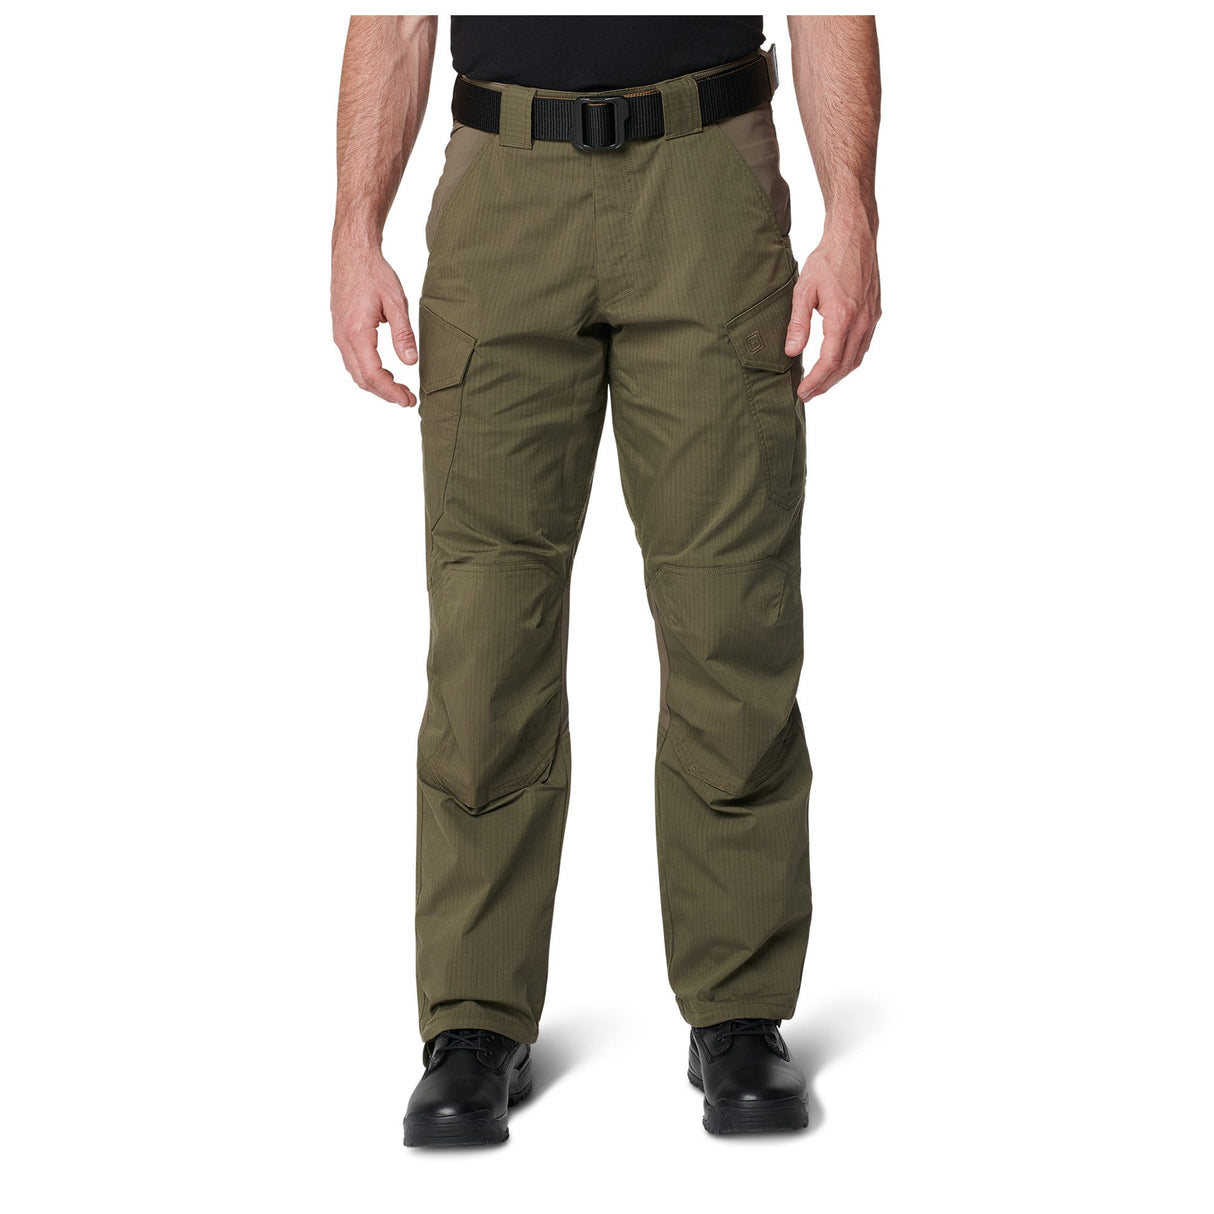 Triple-needle Stitching Pant: Offers superior durability and strength.